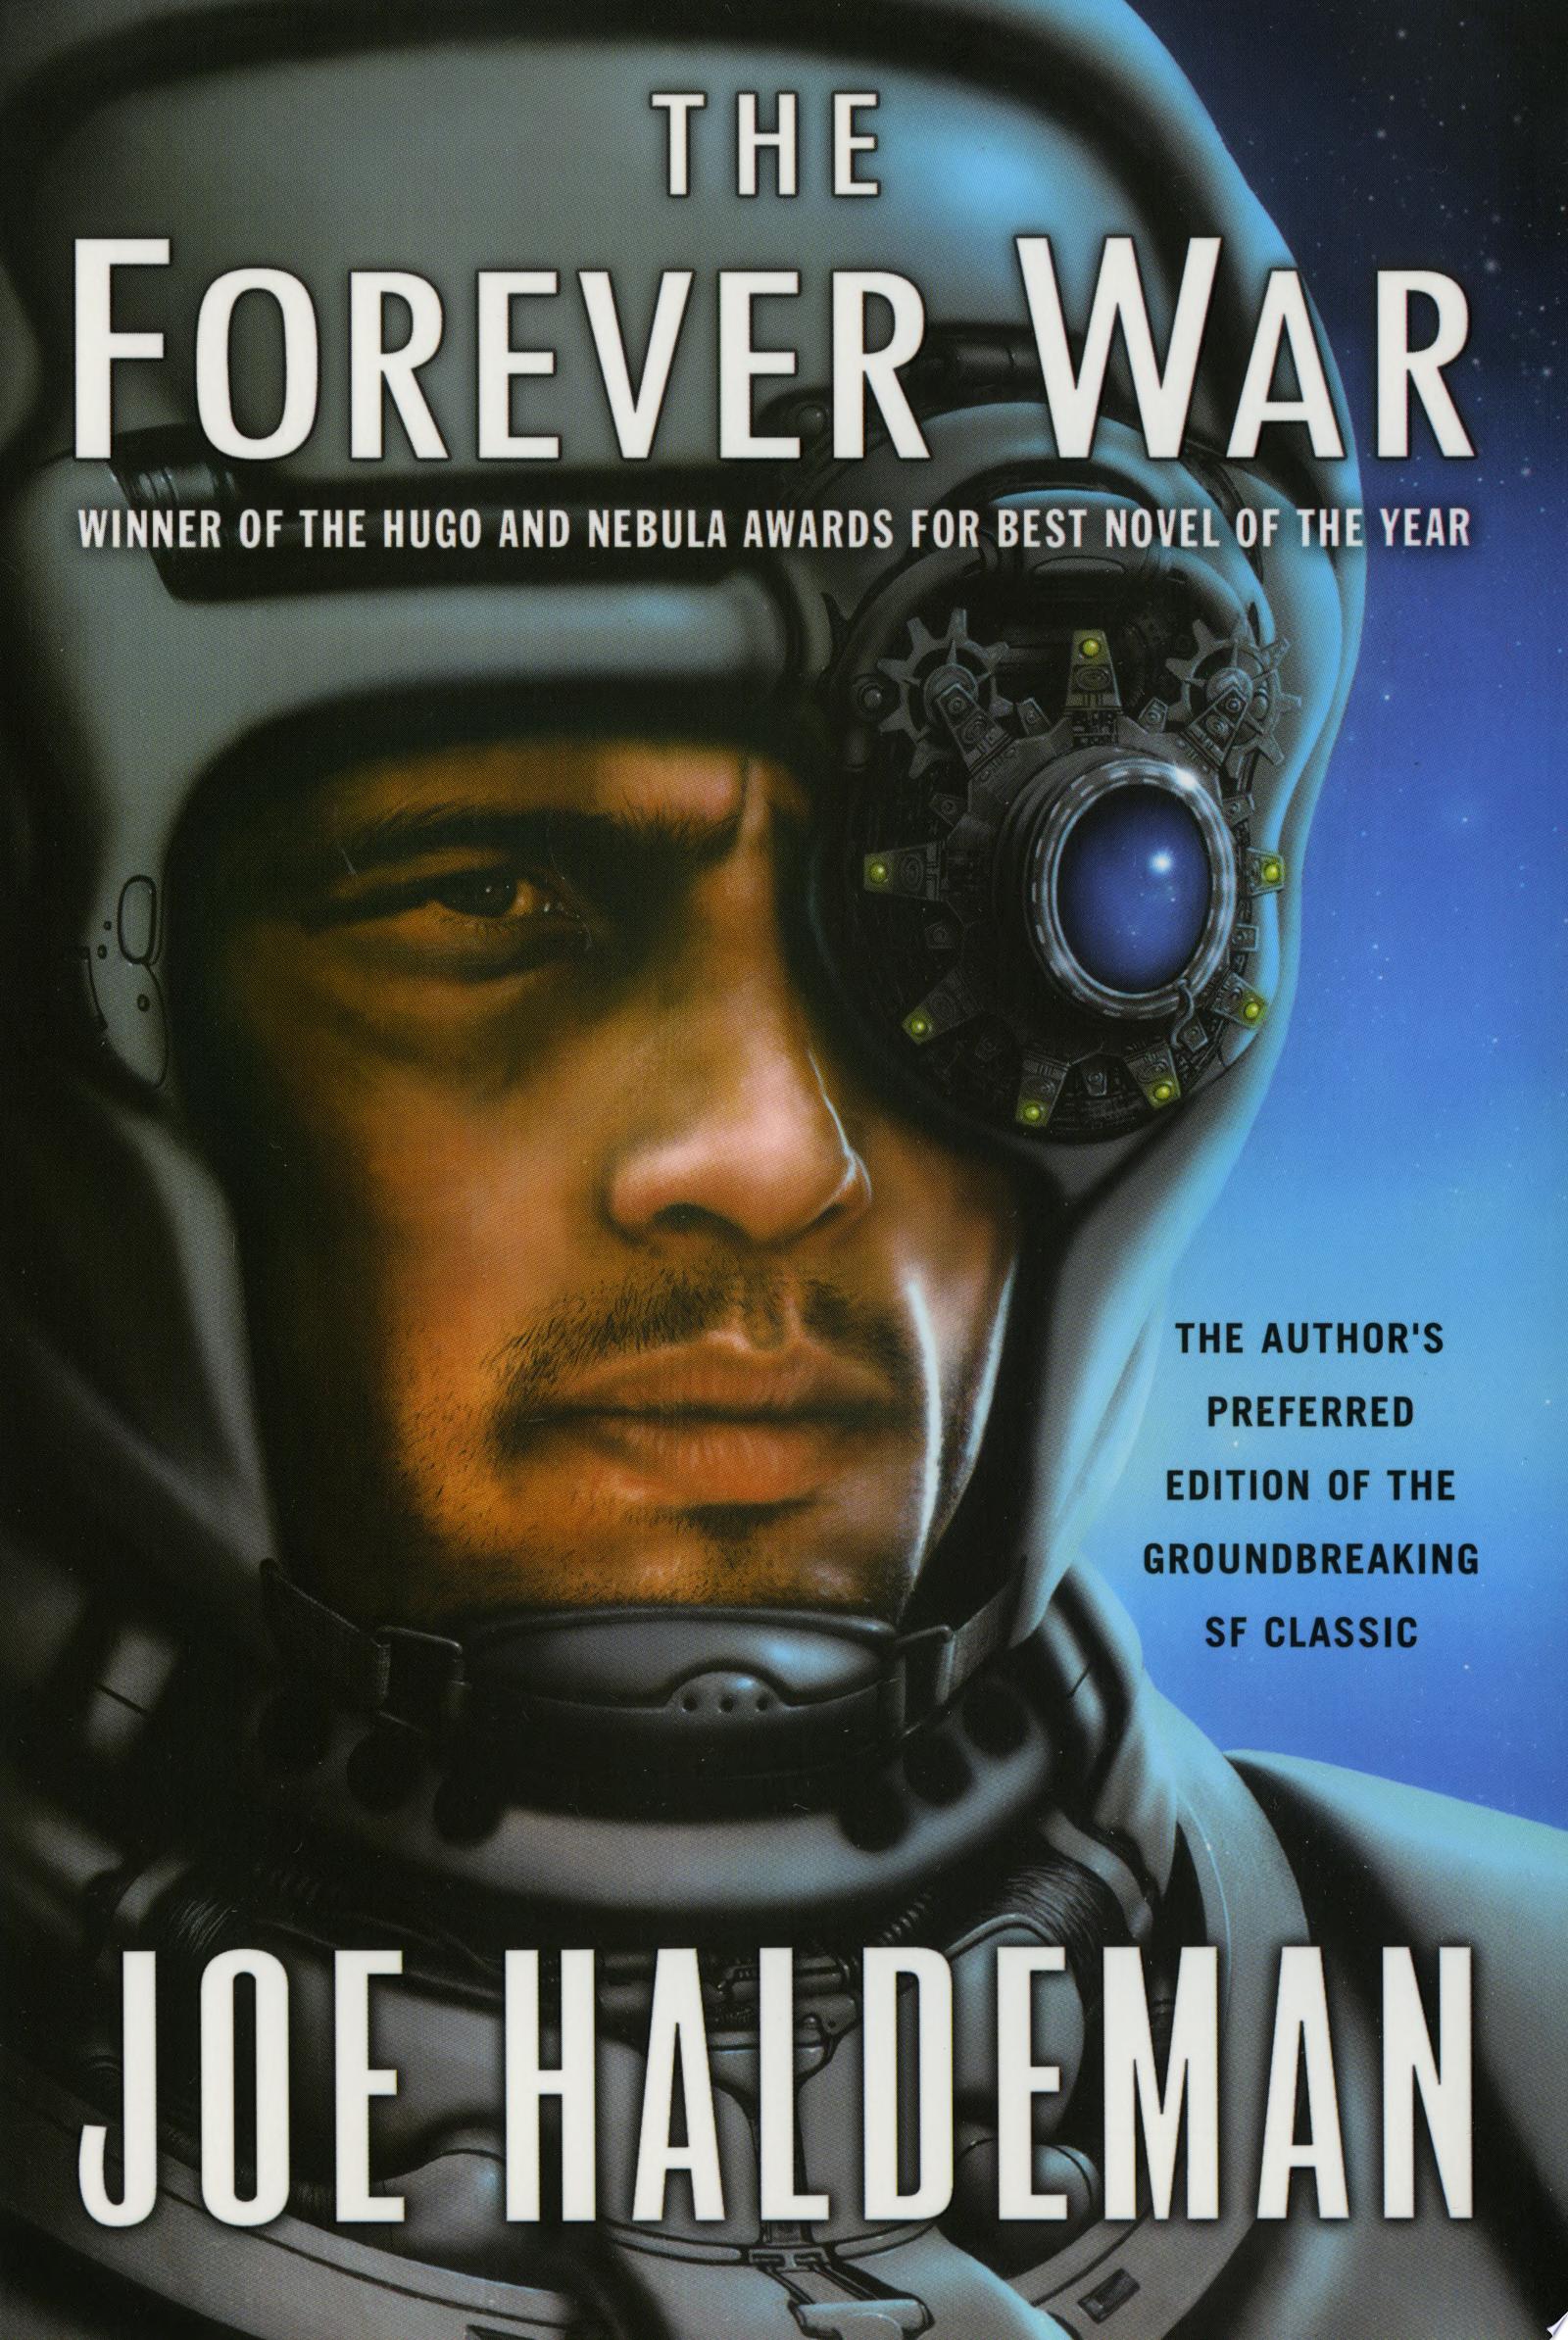 Image for "The Forever War"